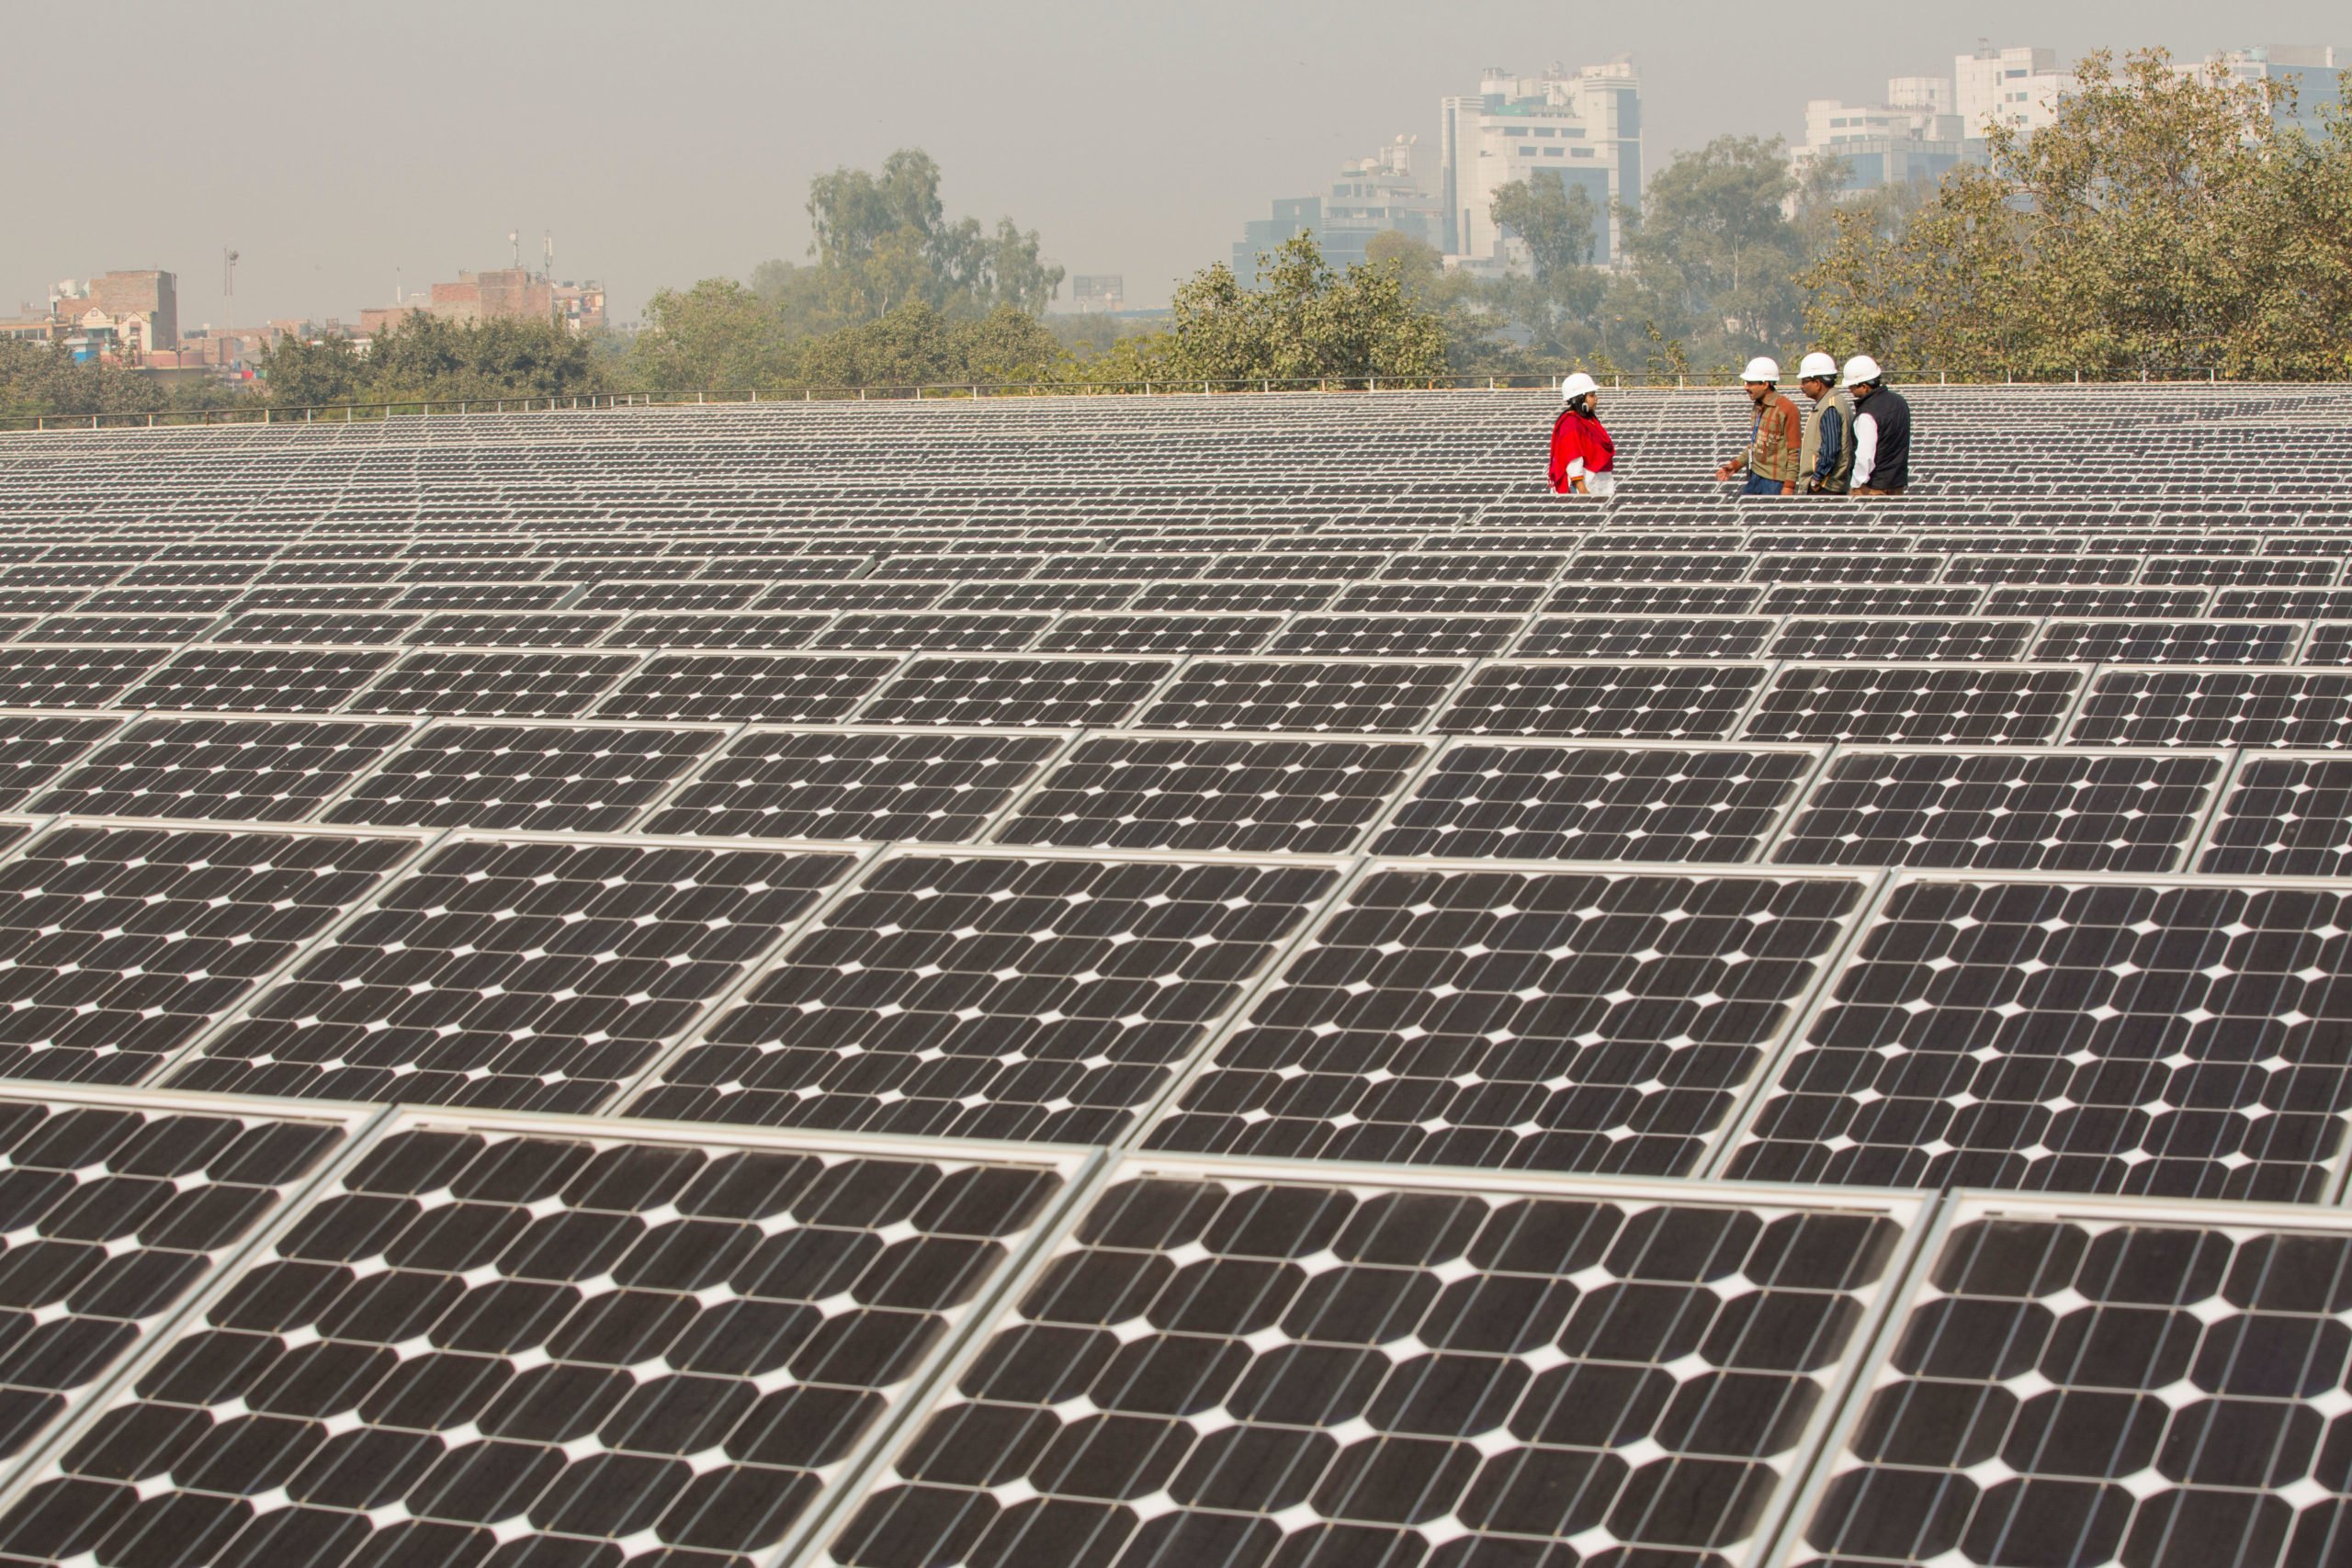 1 MW solar power station in Delhi, India. solar will be an essential part of India's plans to implement the net zero by 2070 target.